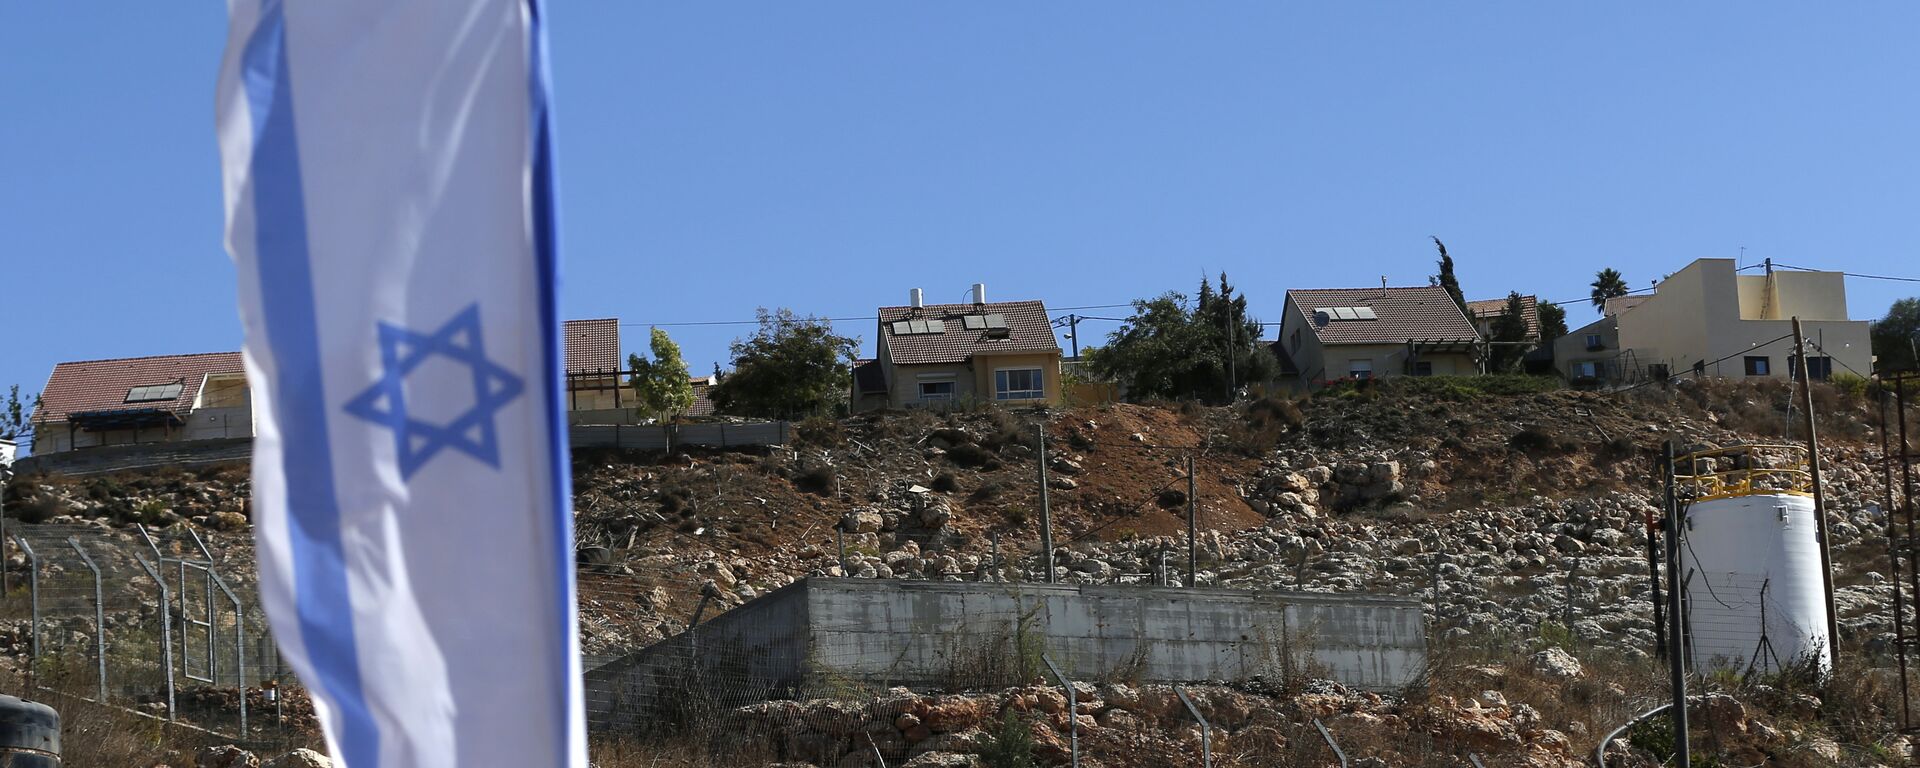 Israeli national flag flying next to an Israeli building site of new housing units in the Jewish settlement of Shilo in the occupied Palestinian West Bank.  - Sputnik International, 1920, 02.12.2021